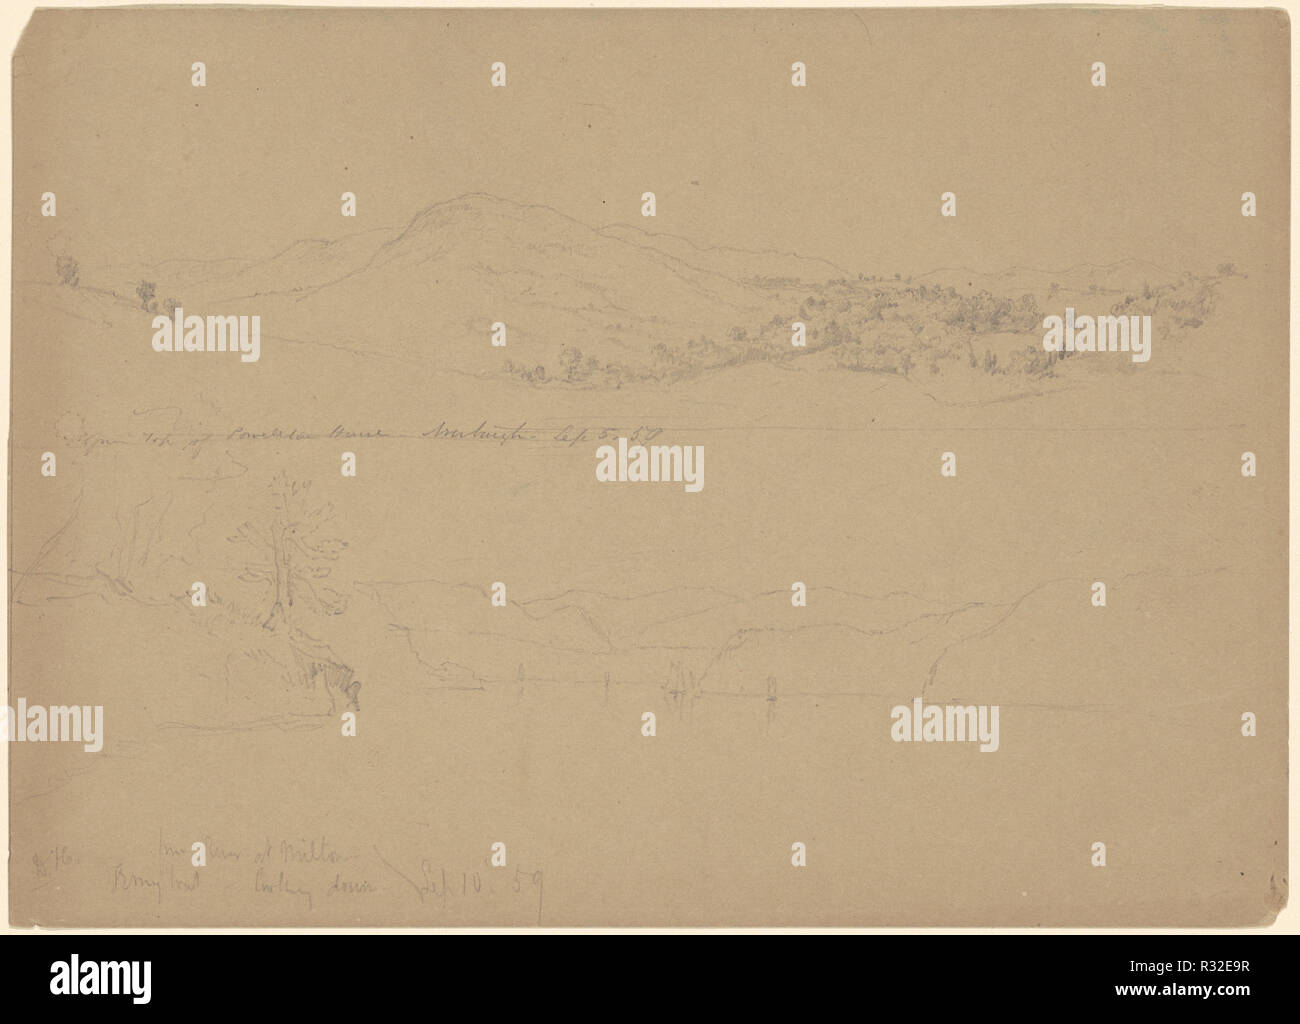 Landscapes. Dated: 1859. Dimensions: sheet: 17.62 × 24.61 cm (6 15/16 × 9 11/16 in.). Medium: graphite on wove paper. Museum: National Gallery of Art, Washington DC. Author: DANIEL HUNTINGTON. Stock Photo